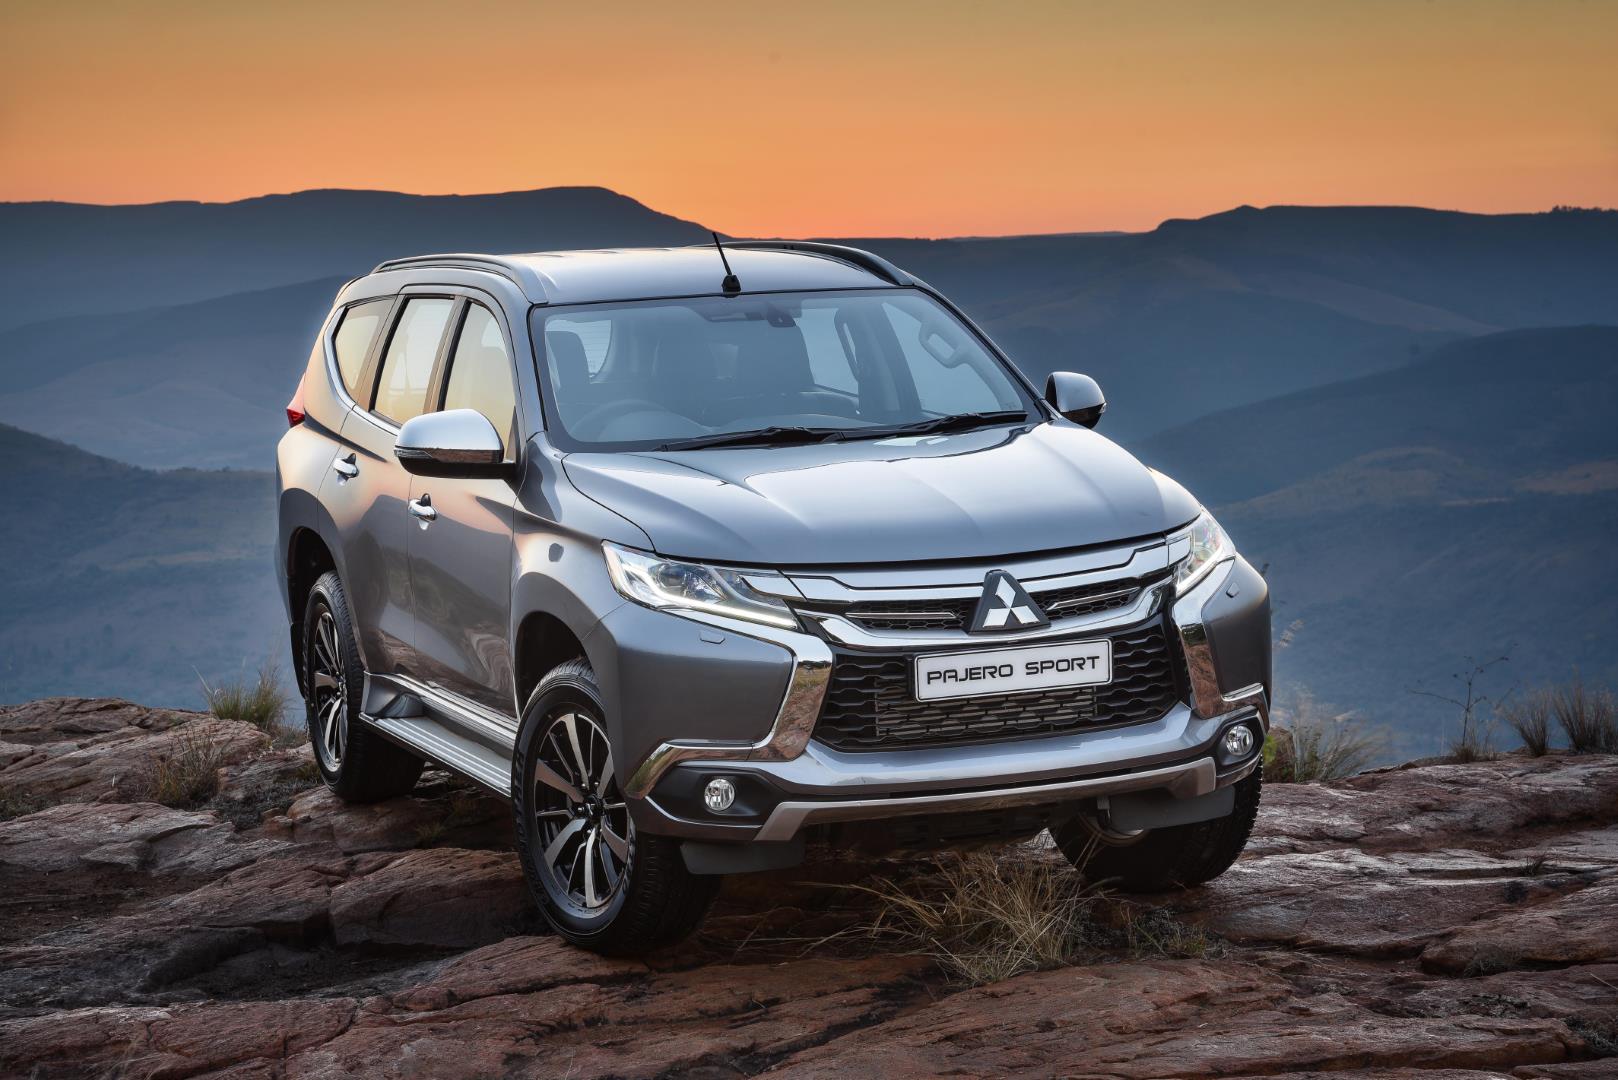 6 Things we love about the Mitsubishi Pajero Sport